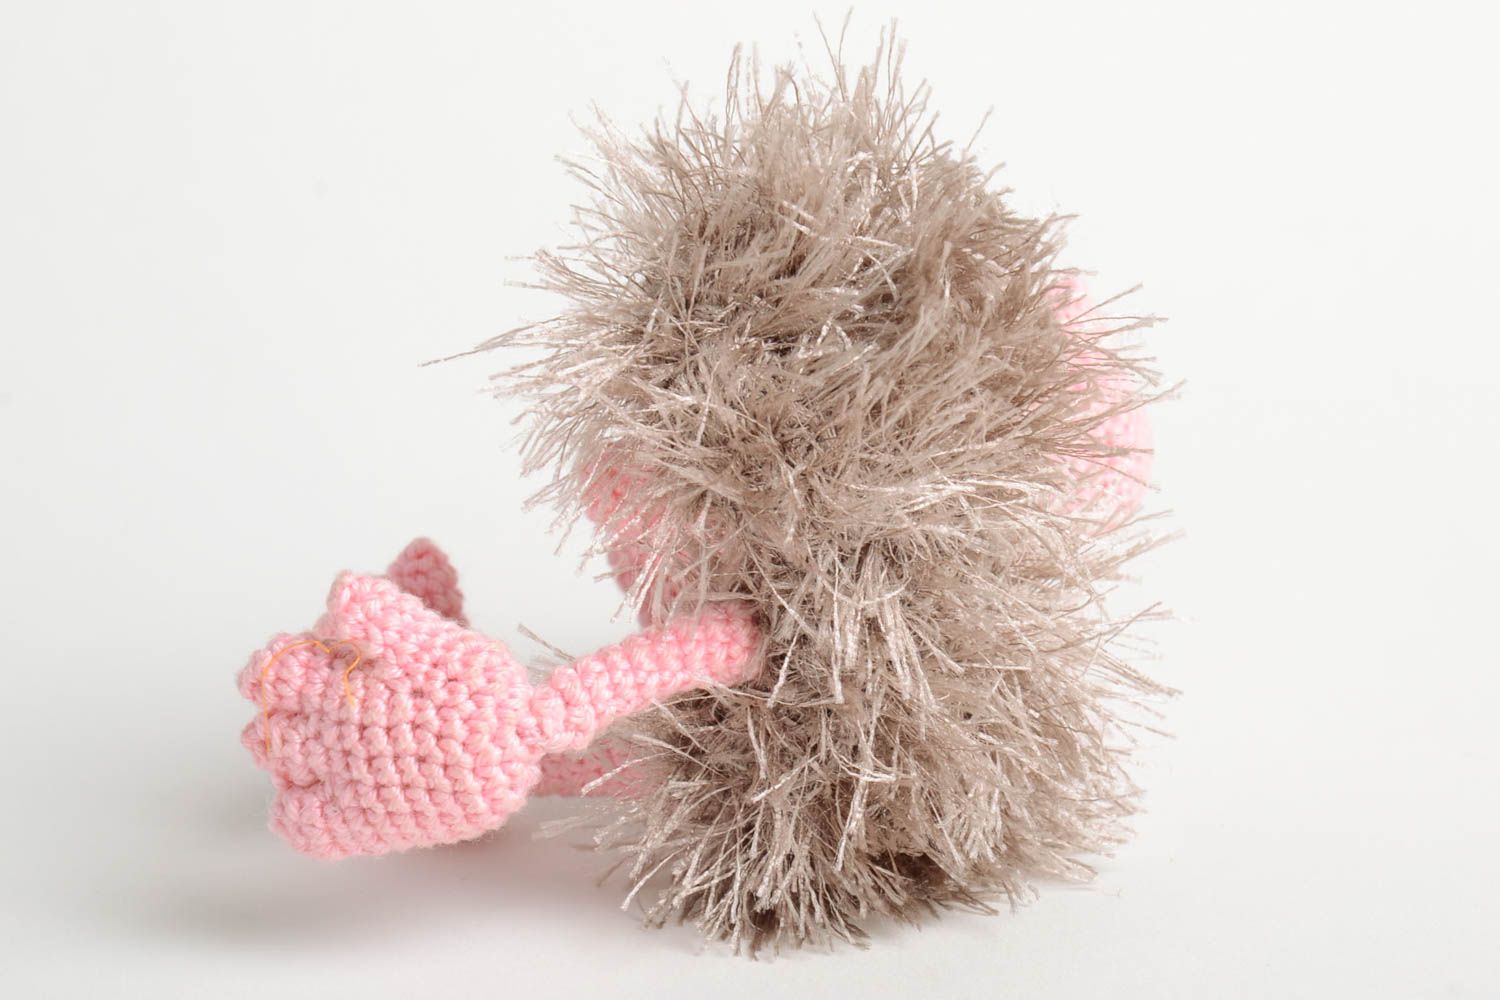 Handmade crocheted toy stylish unusual toy for kids funny hedgehog toy photo 3